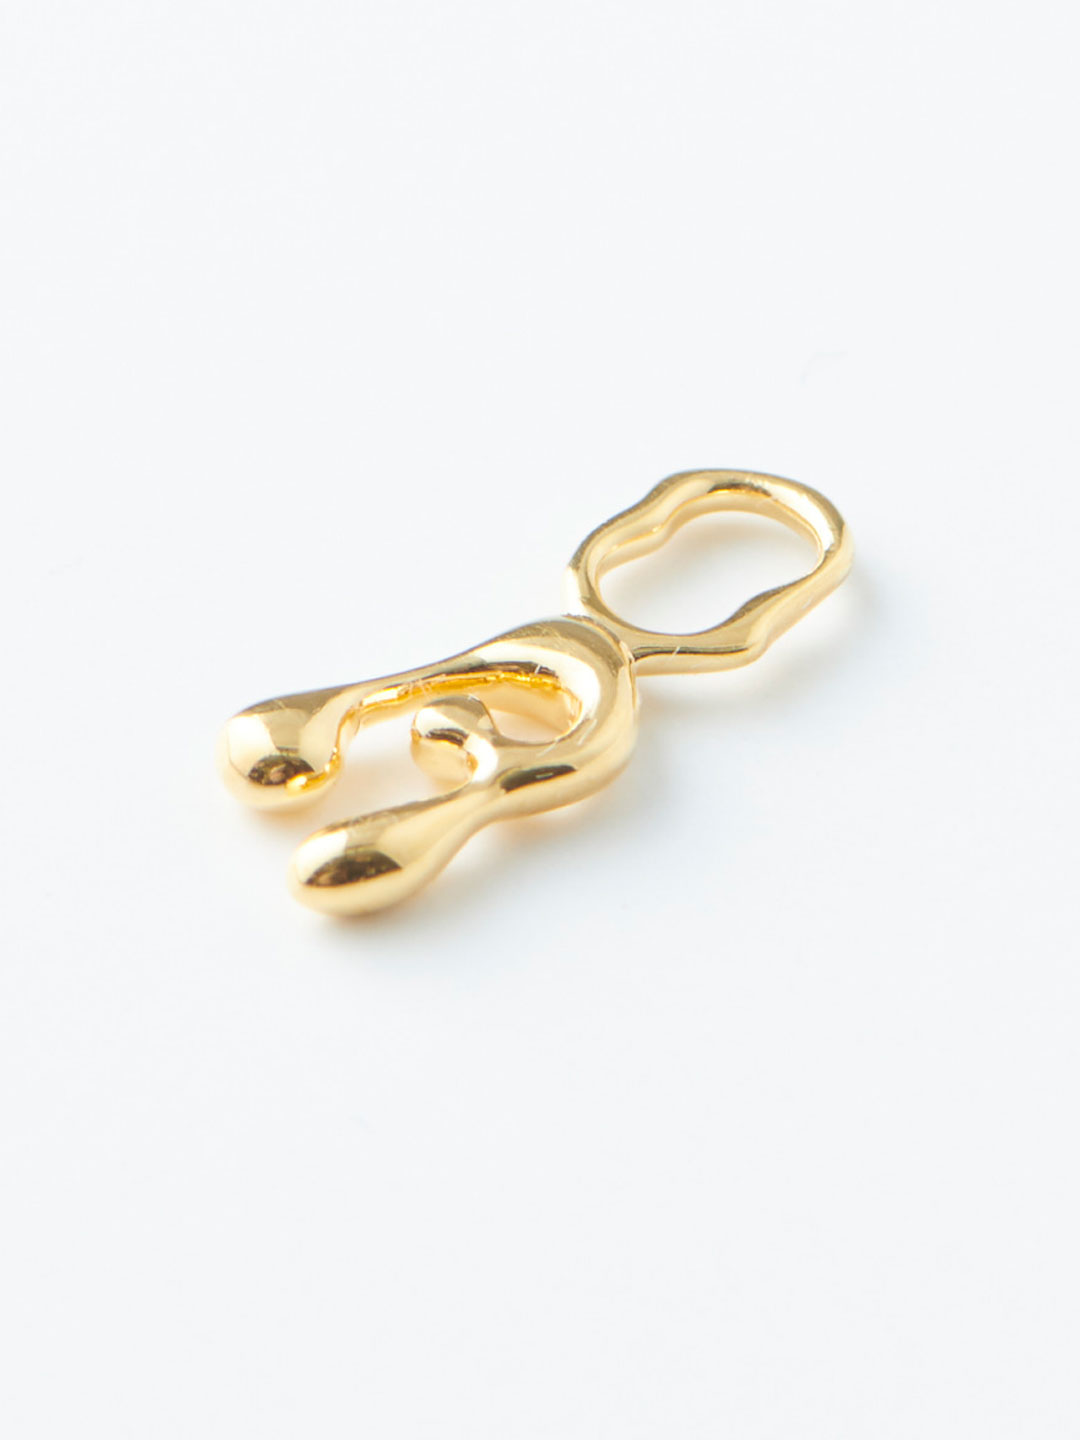 Fluent Letter A Charm - Yellow Gold